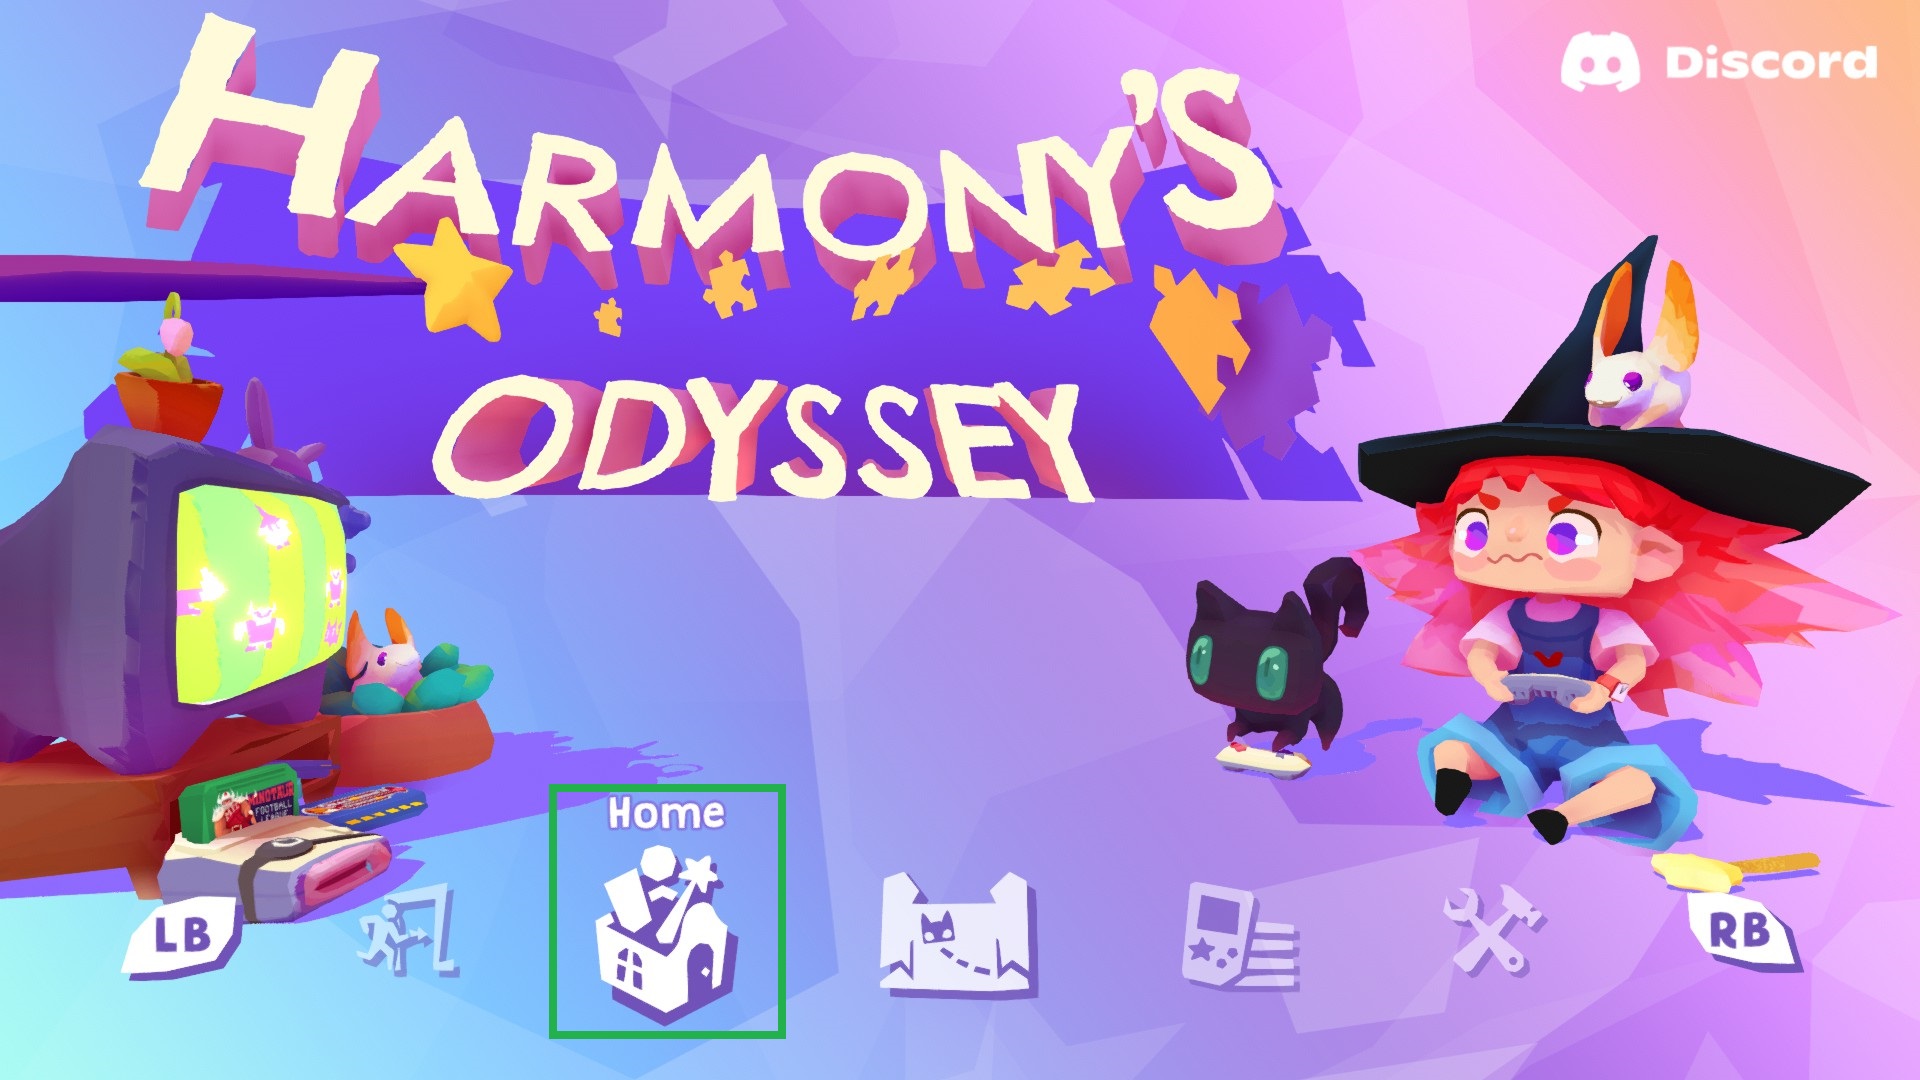 Harmony's Odyssey - How to solve missing puzzles - Make It Rain! - spend your stars - 44425C4